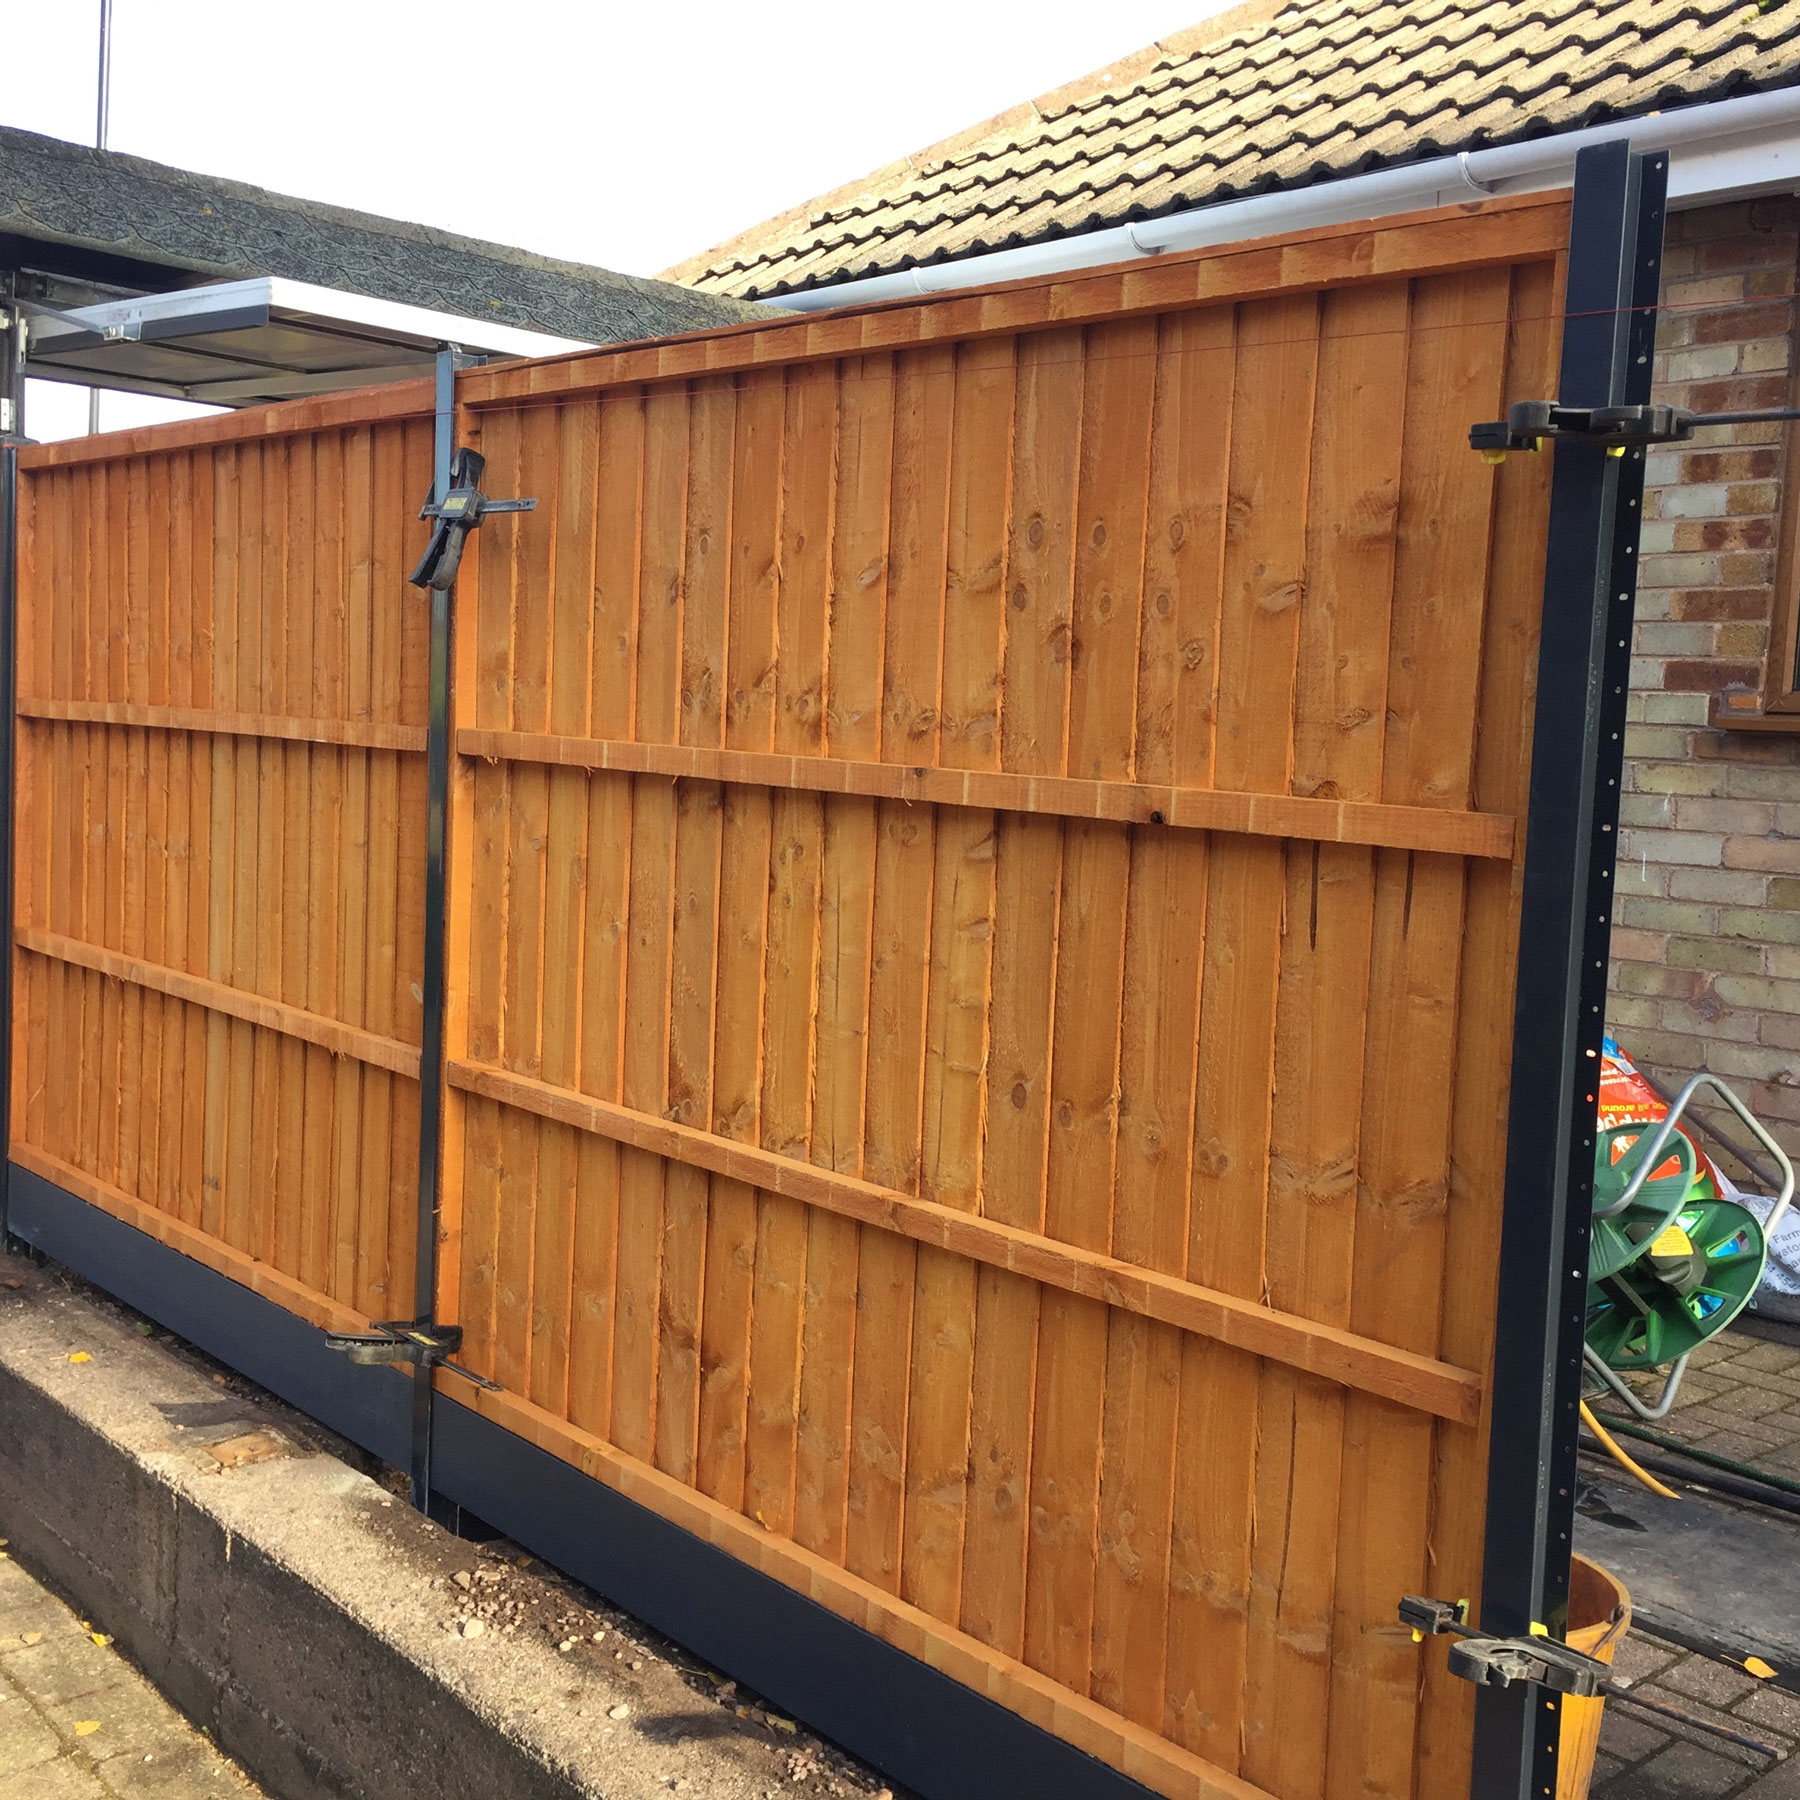 Second 5 feet high fence panel fitted 